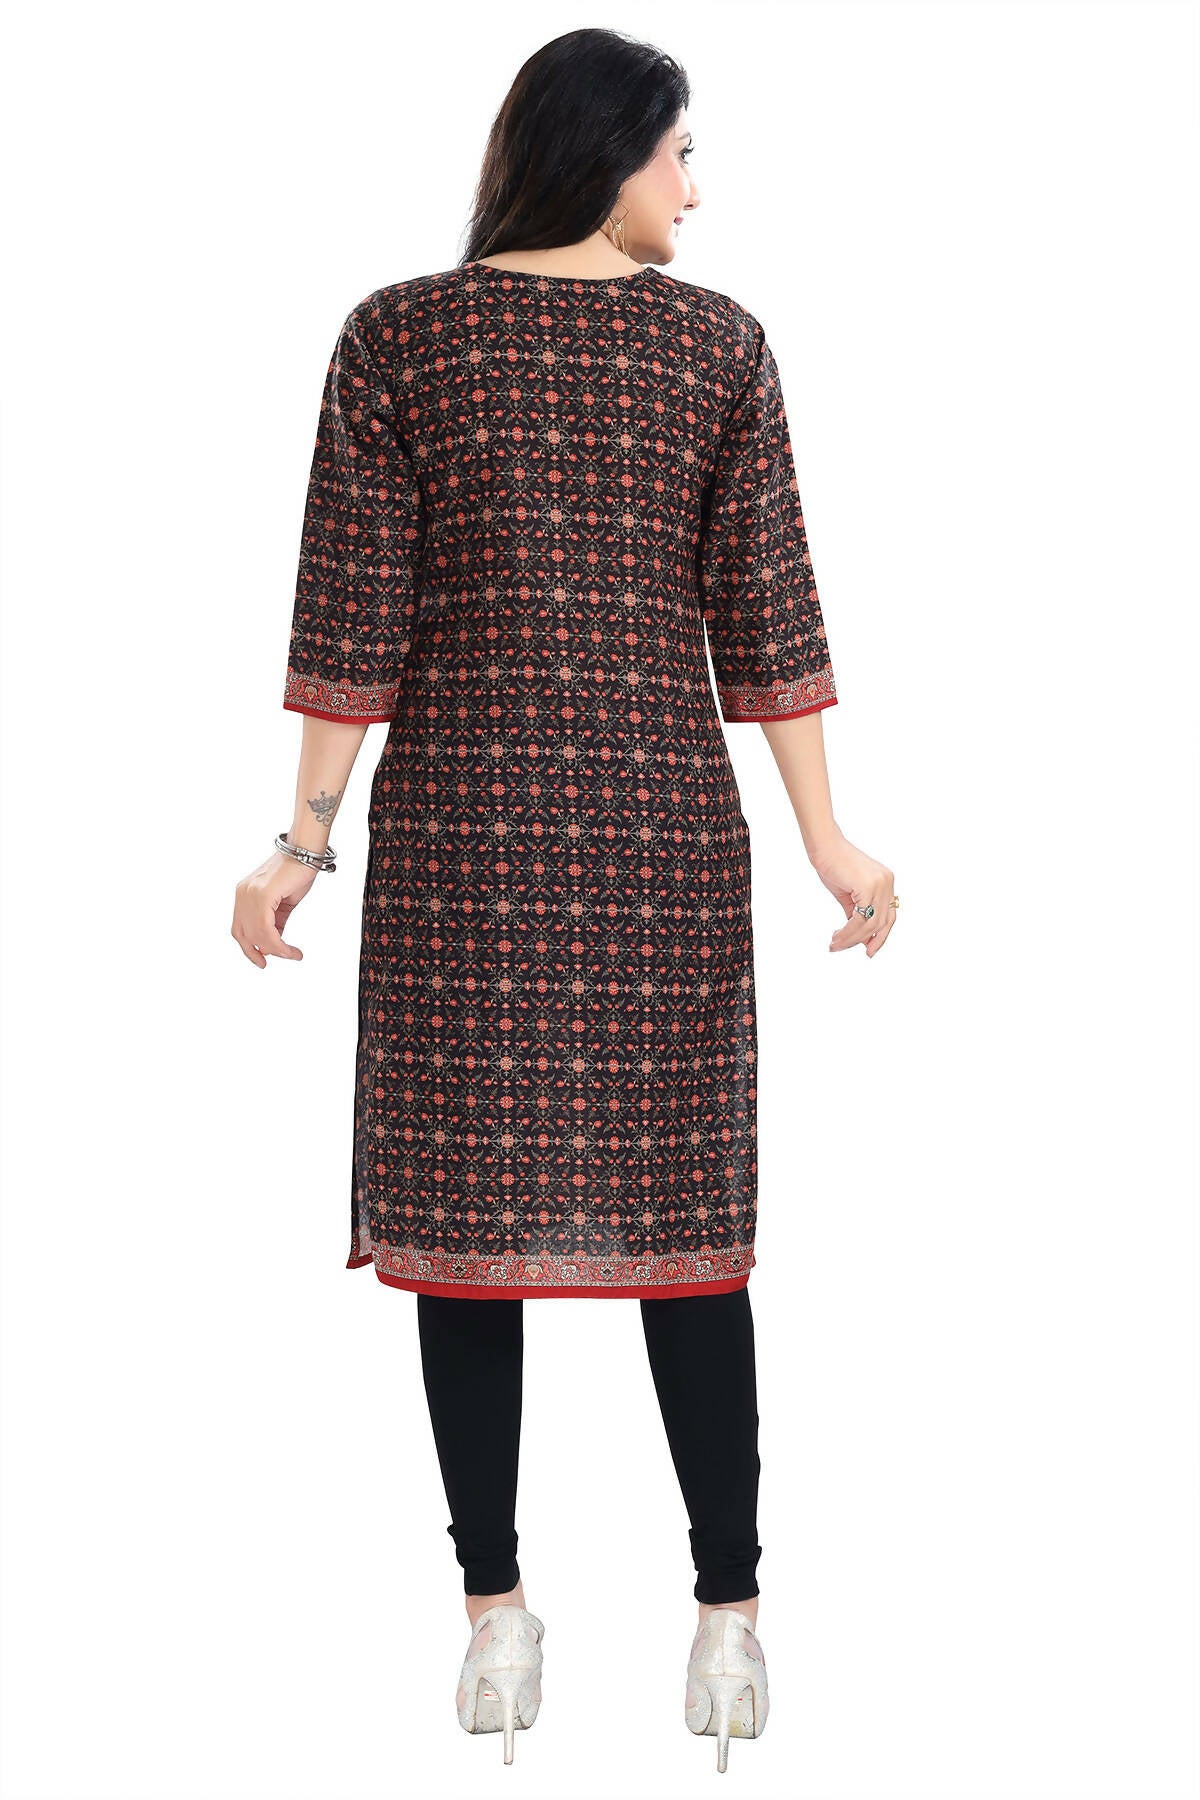 Buy Cotton Fabric Designer Kurti in Red Color Online - SALV3124 | Appelle  Fashion